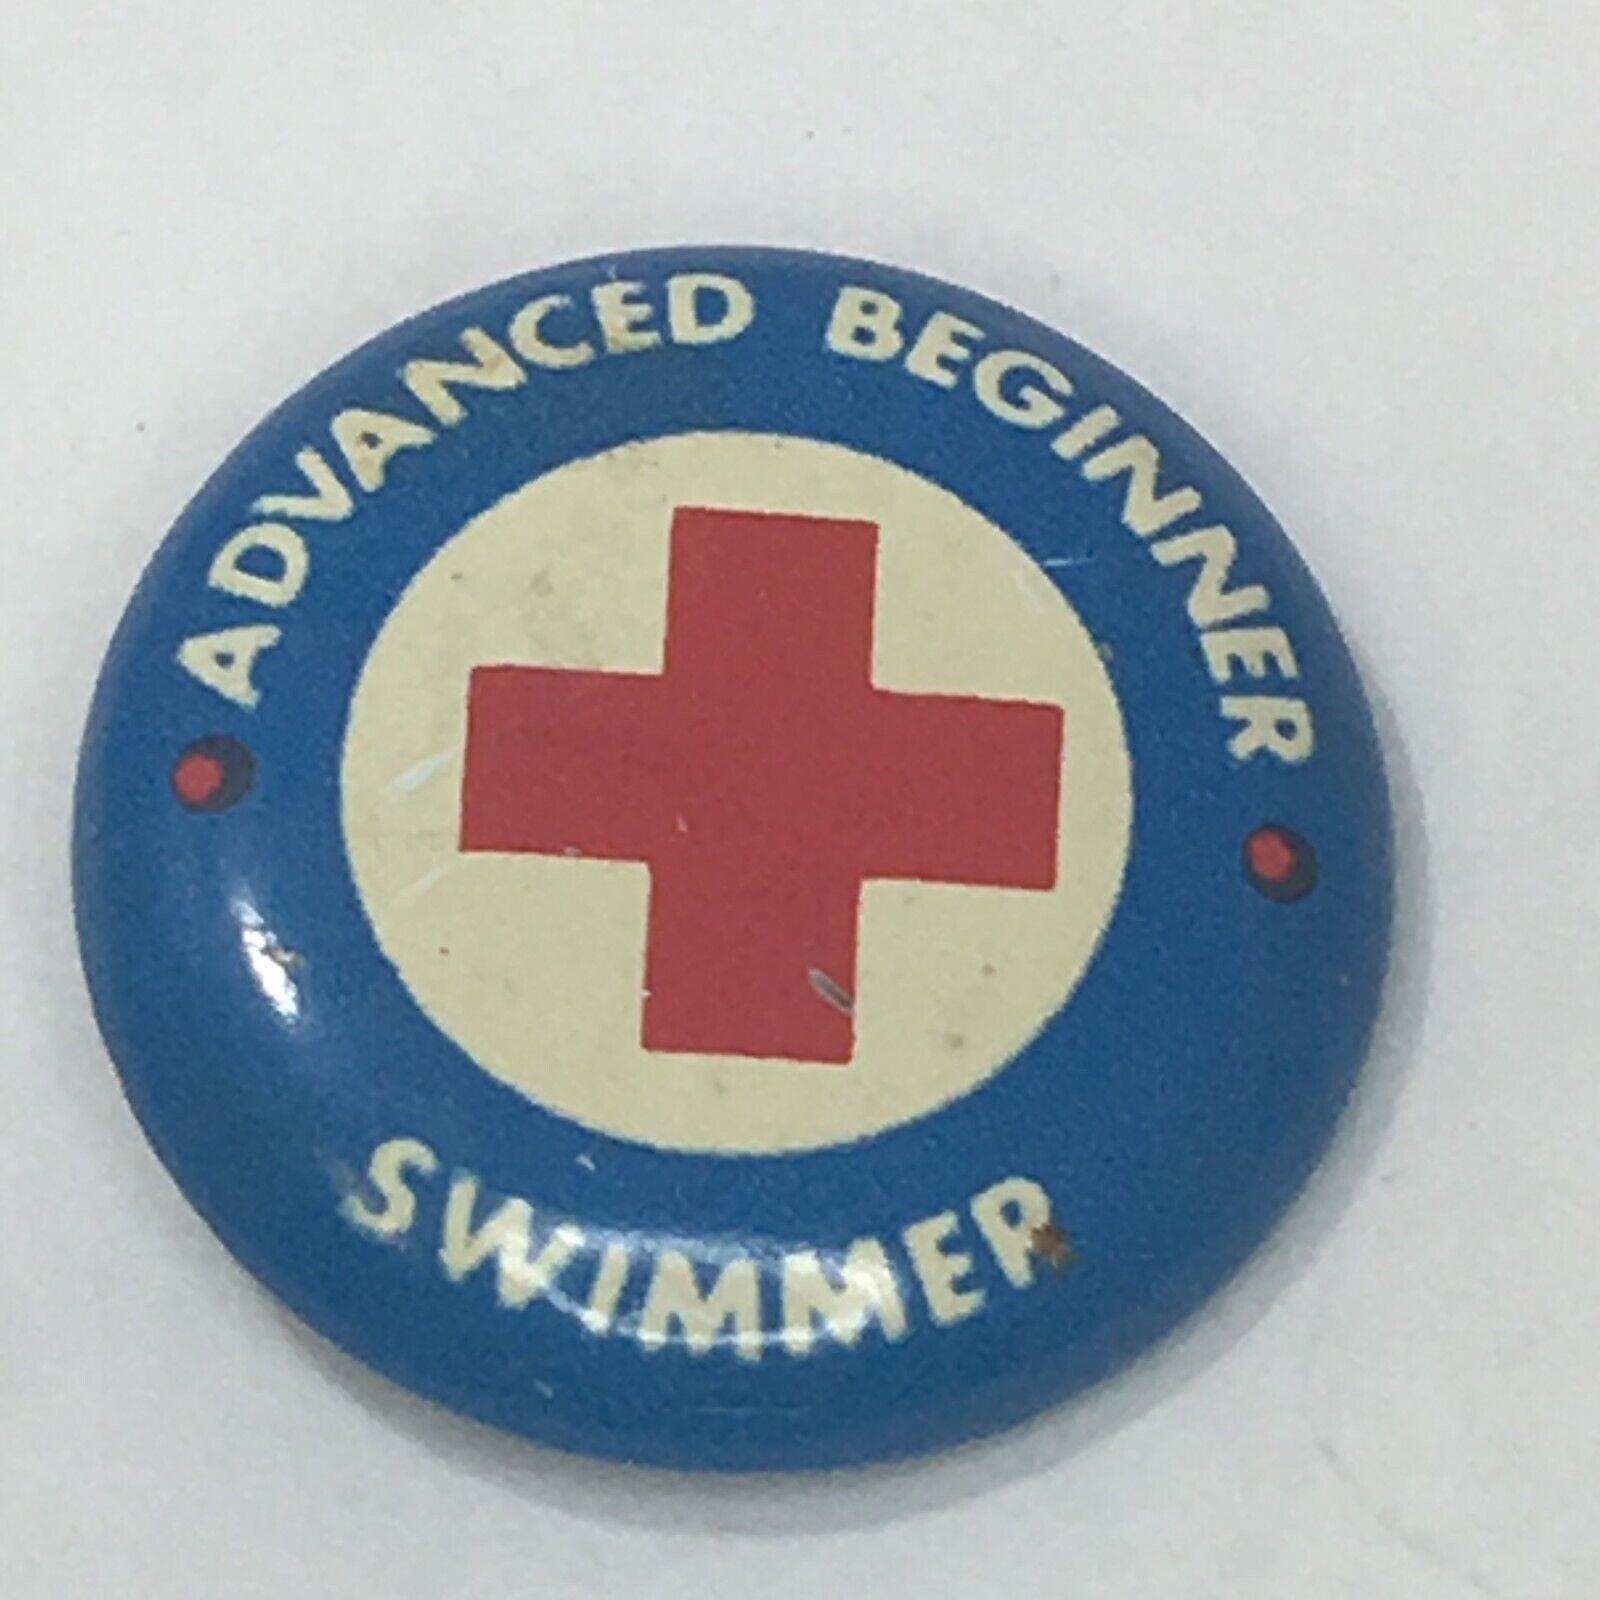 Vintage Red Cross Advanced Beginner Swimmer Pinback Pin Back Button Union Label